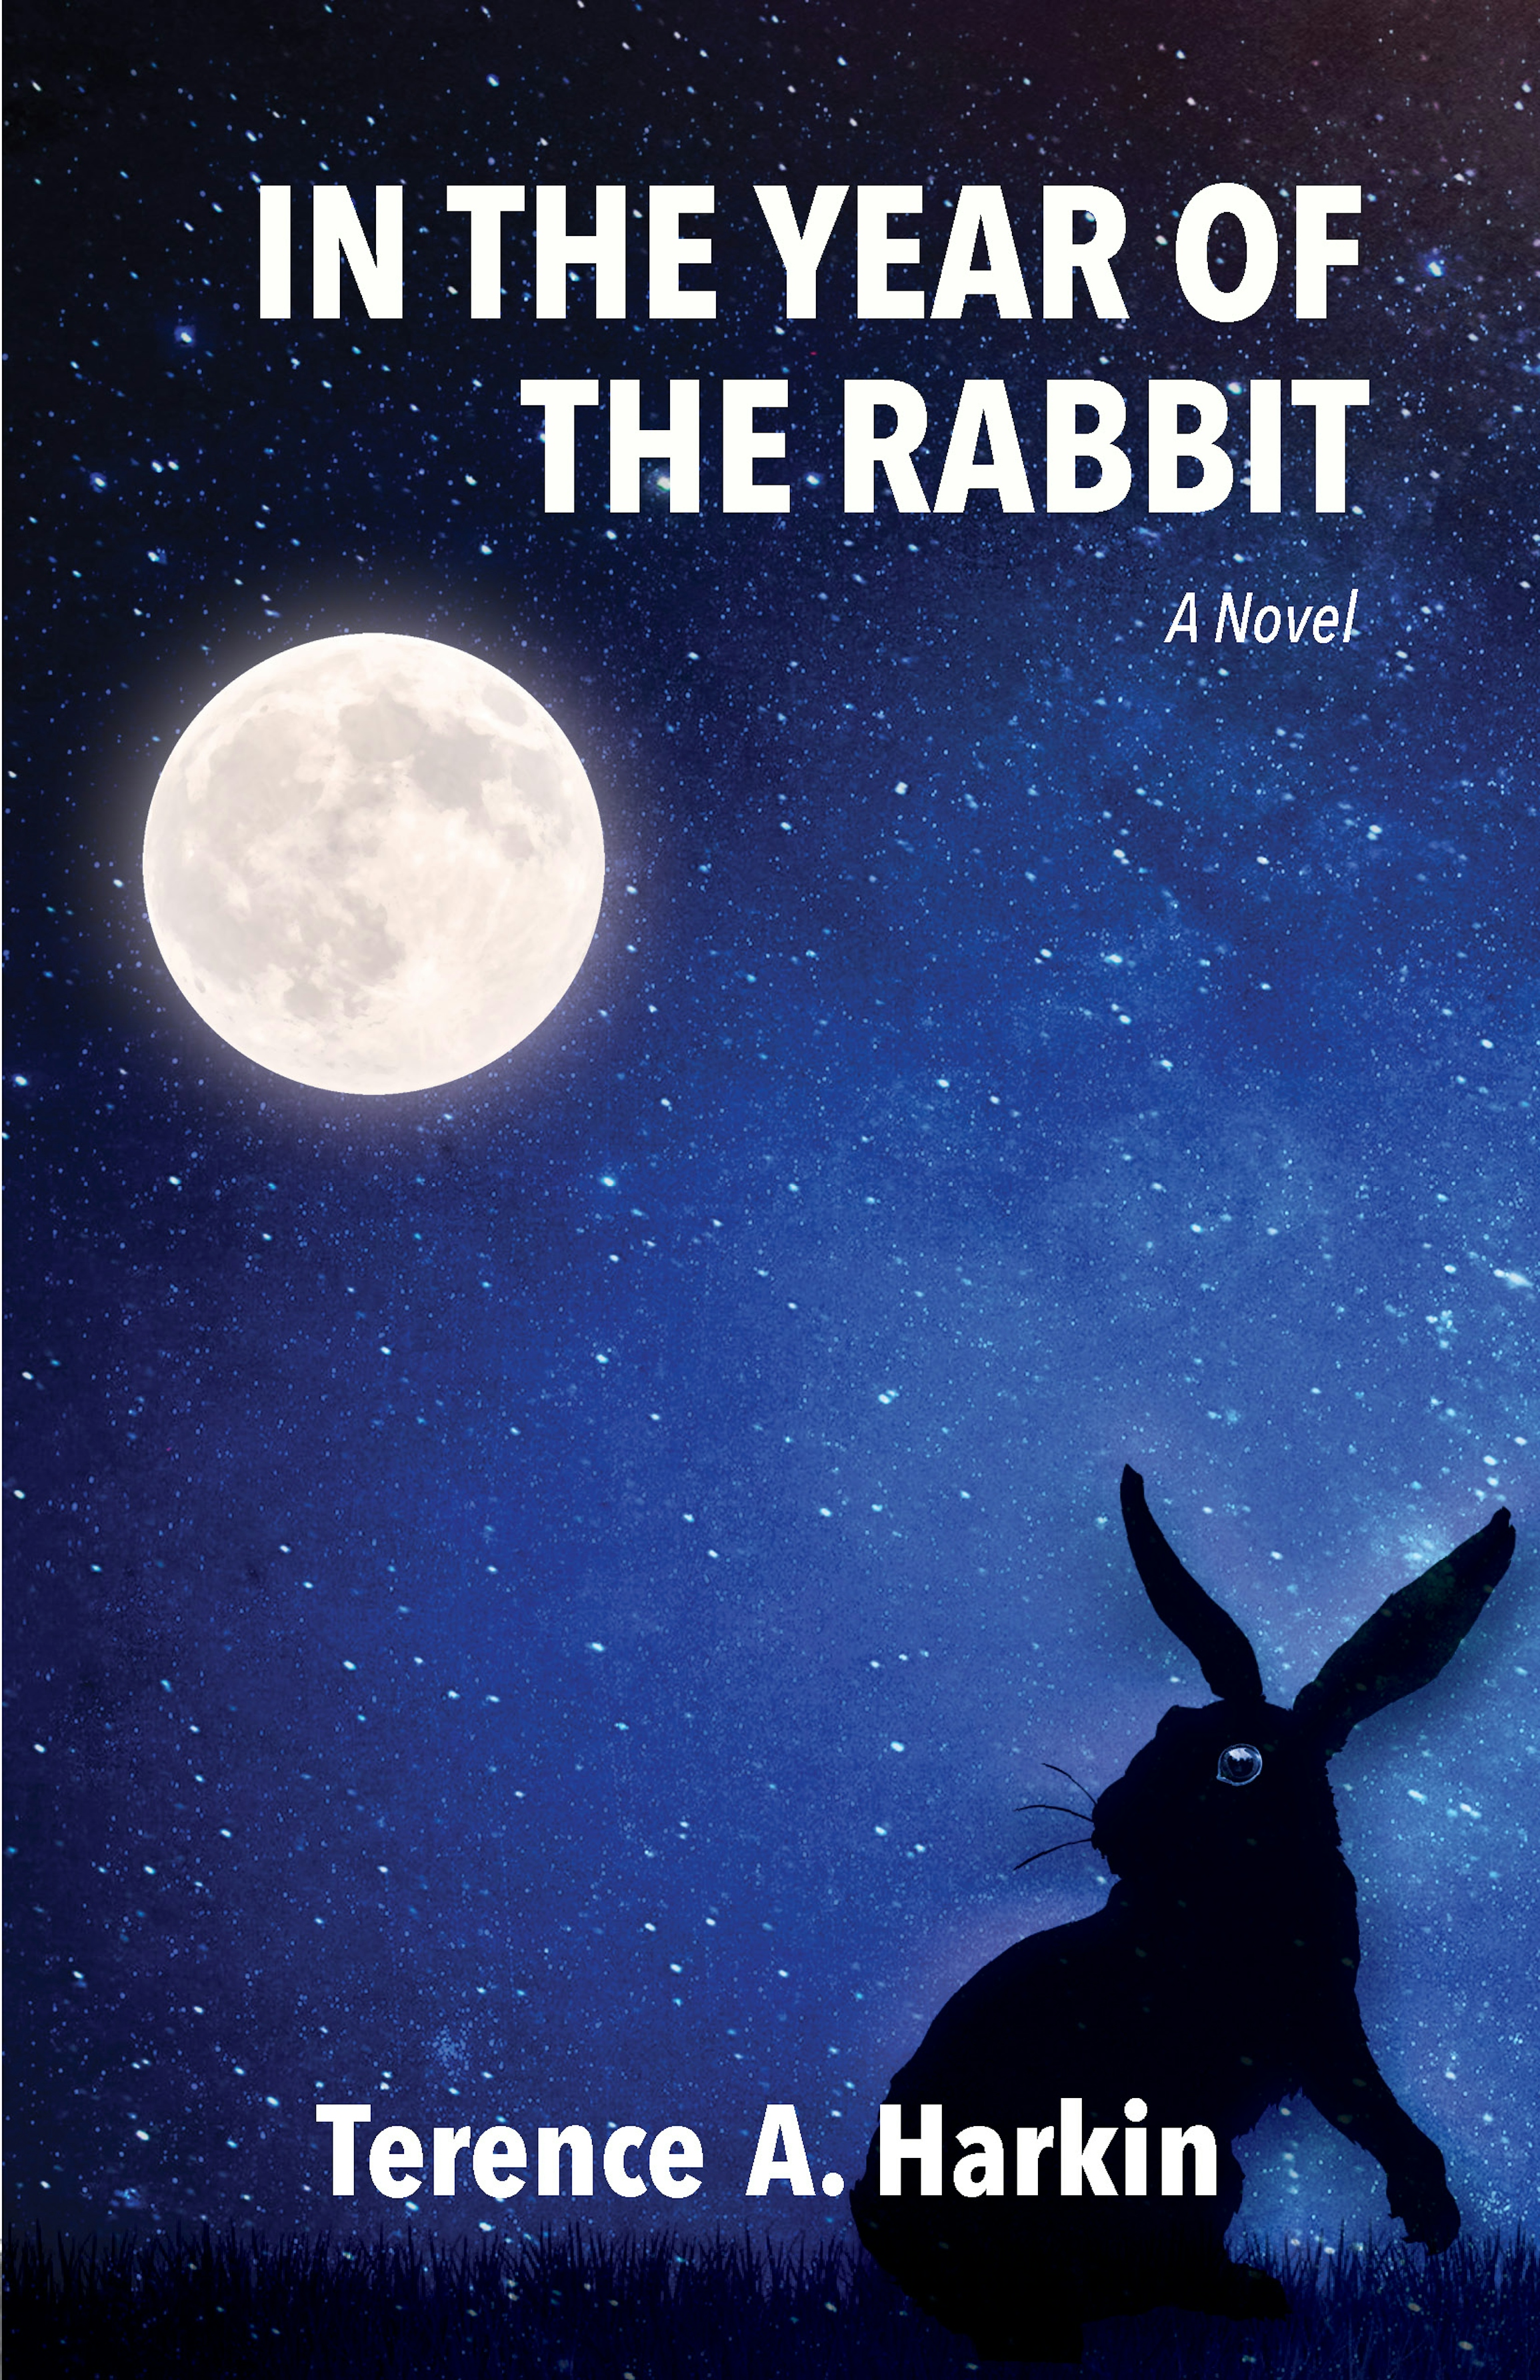 In the Year of the Rabbit